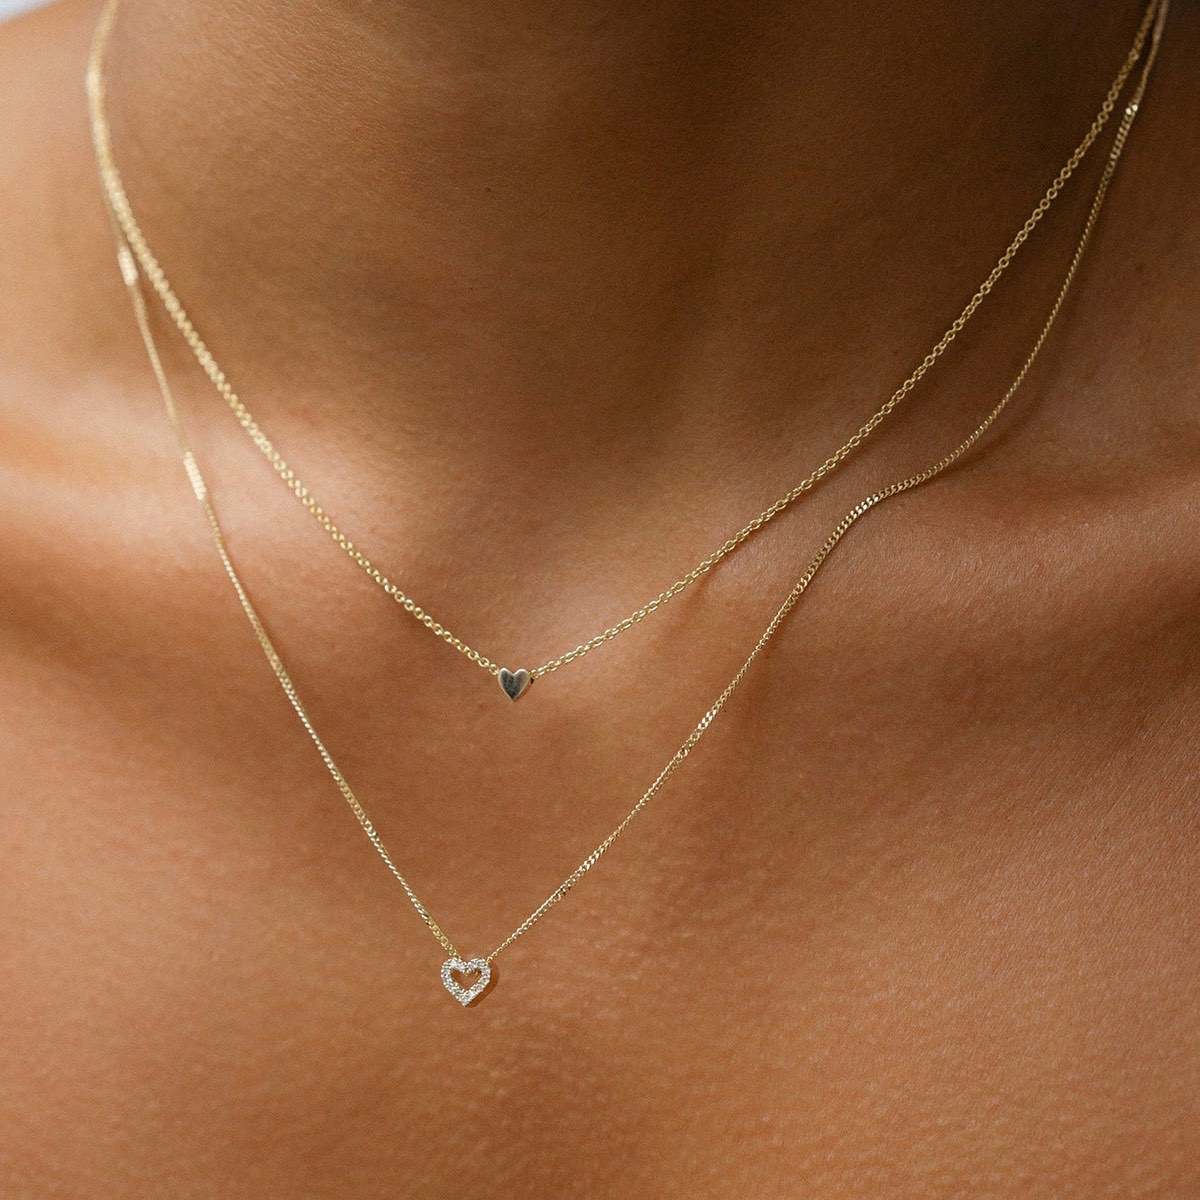 Model wears our beautiful Diamond Heart Charm Necklace in 9ct yellow gold, with a 45cm diamond curb chain layered with our 40cm solid gold Tiny Letter Necklace